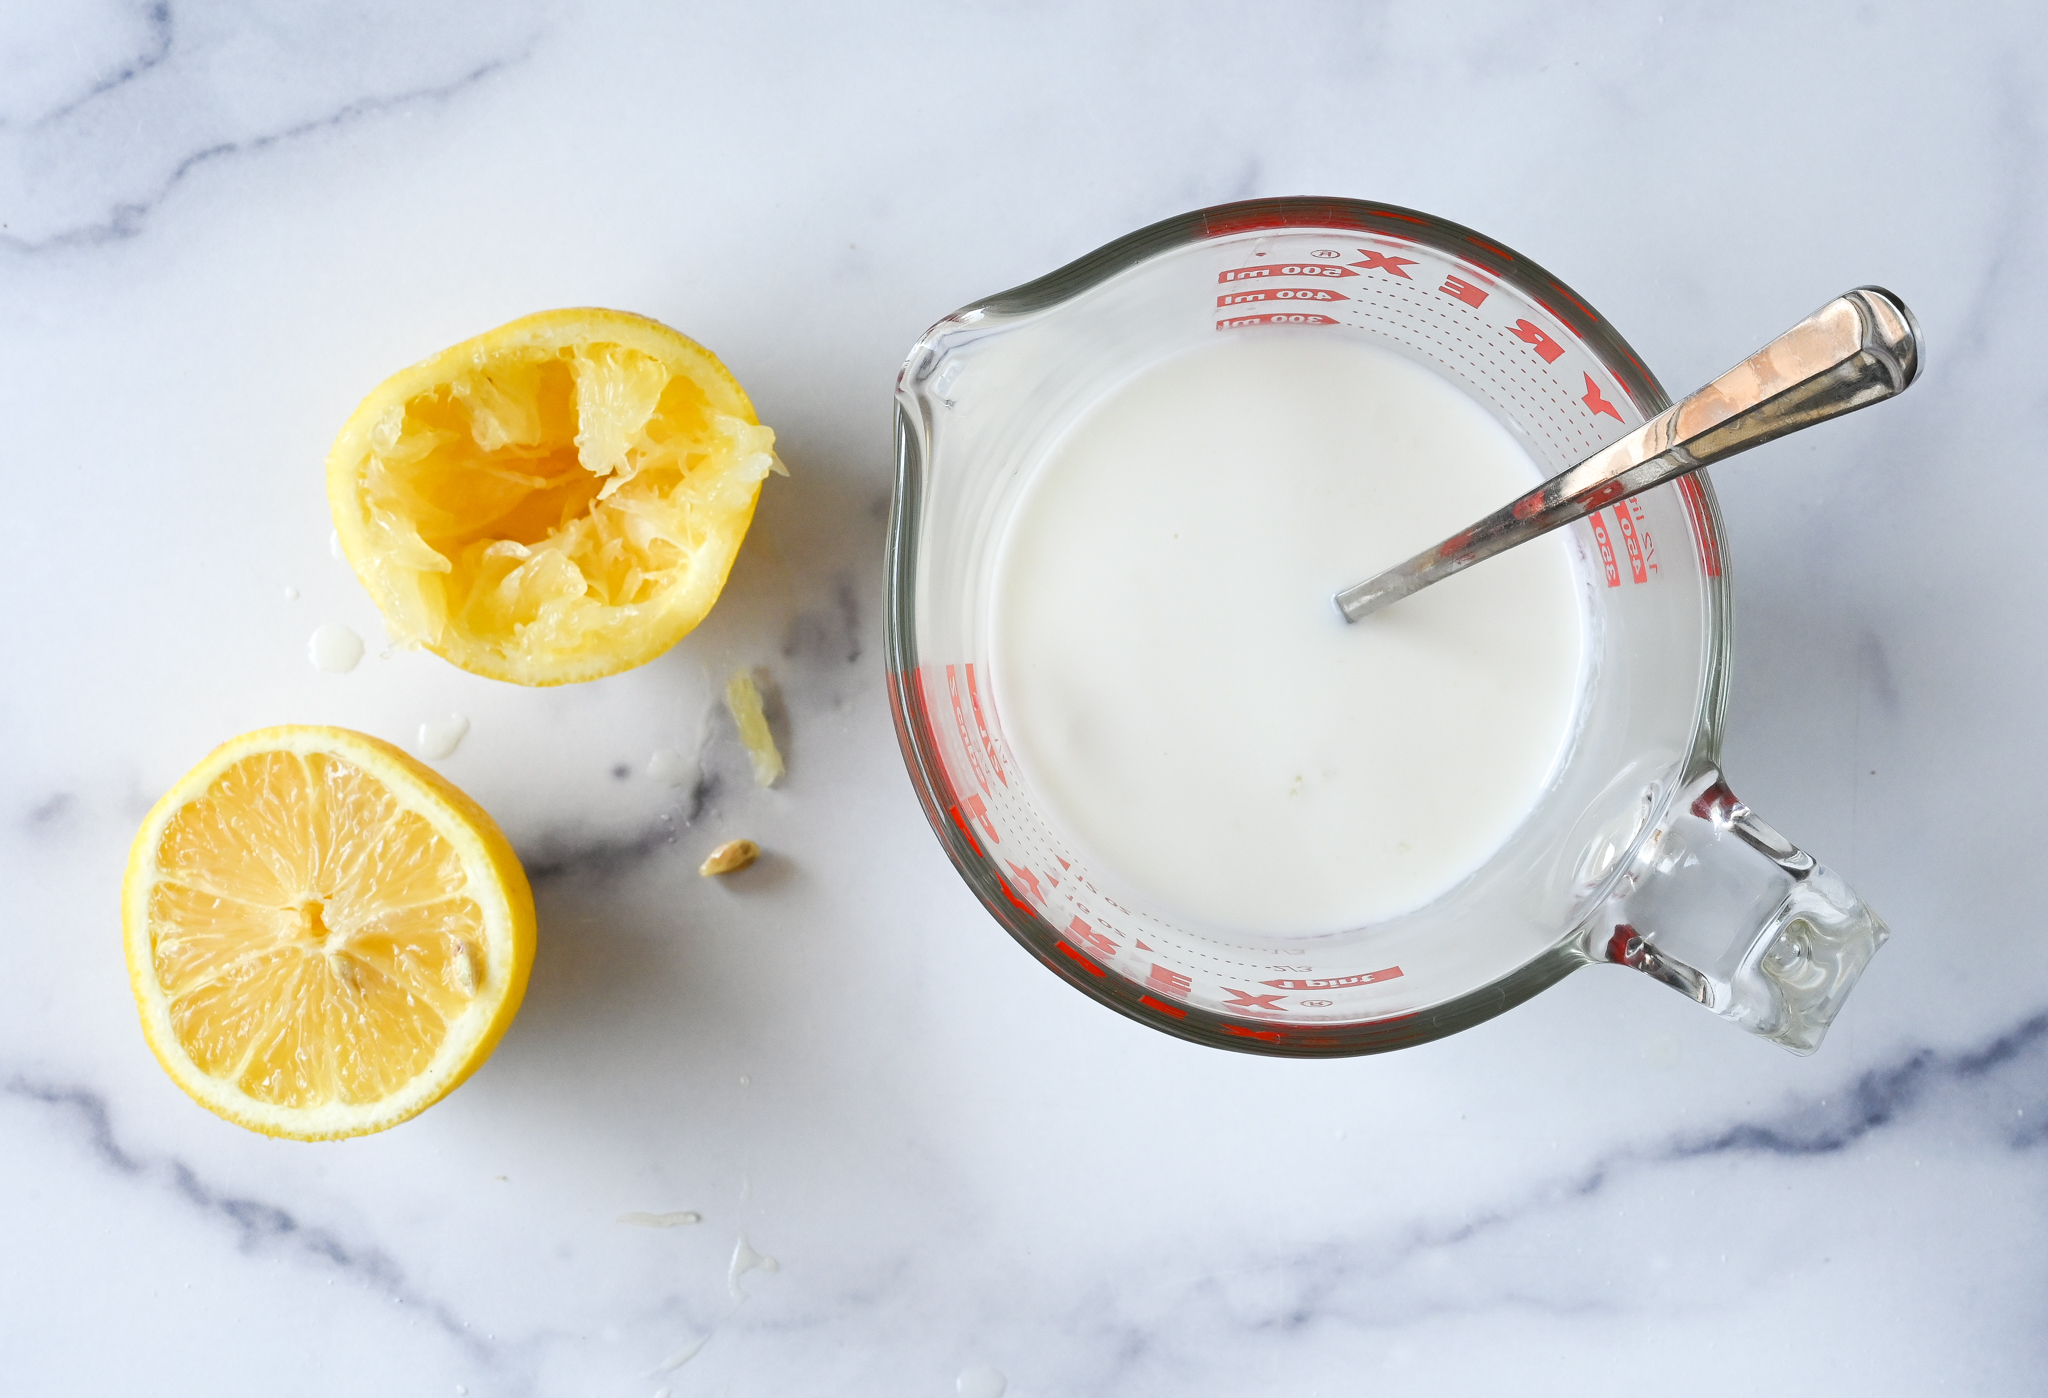 How to Make Buttermilk 